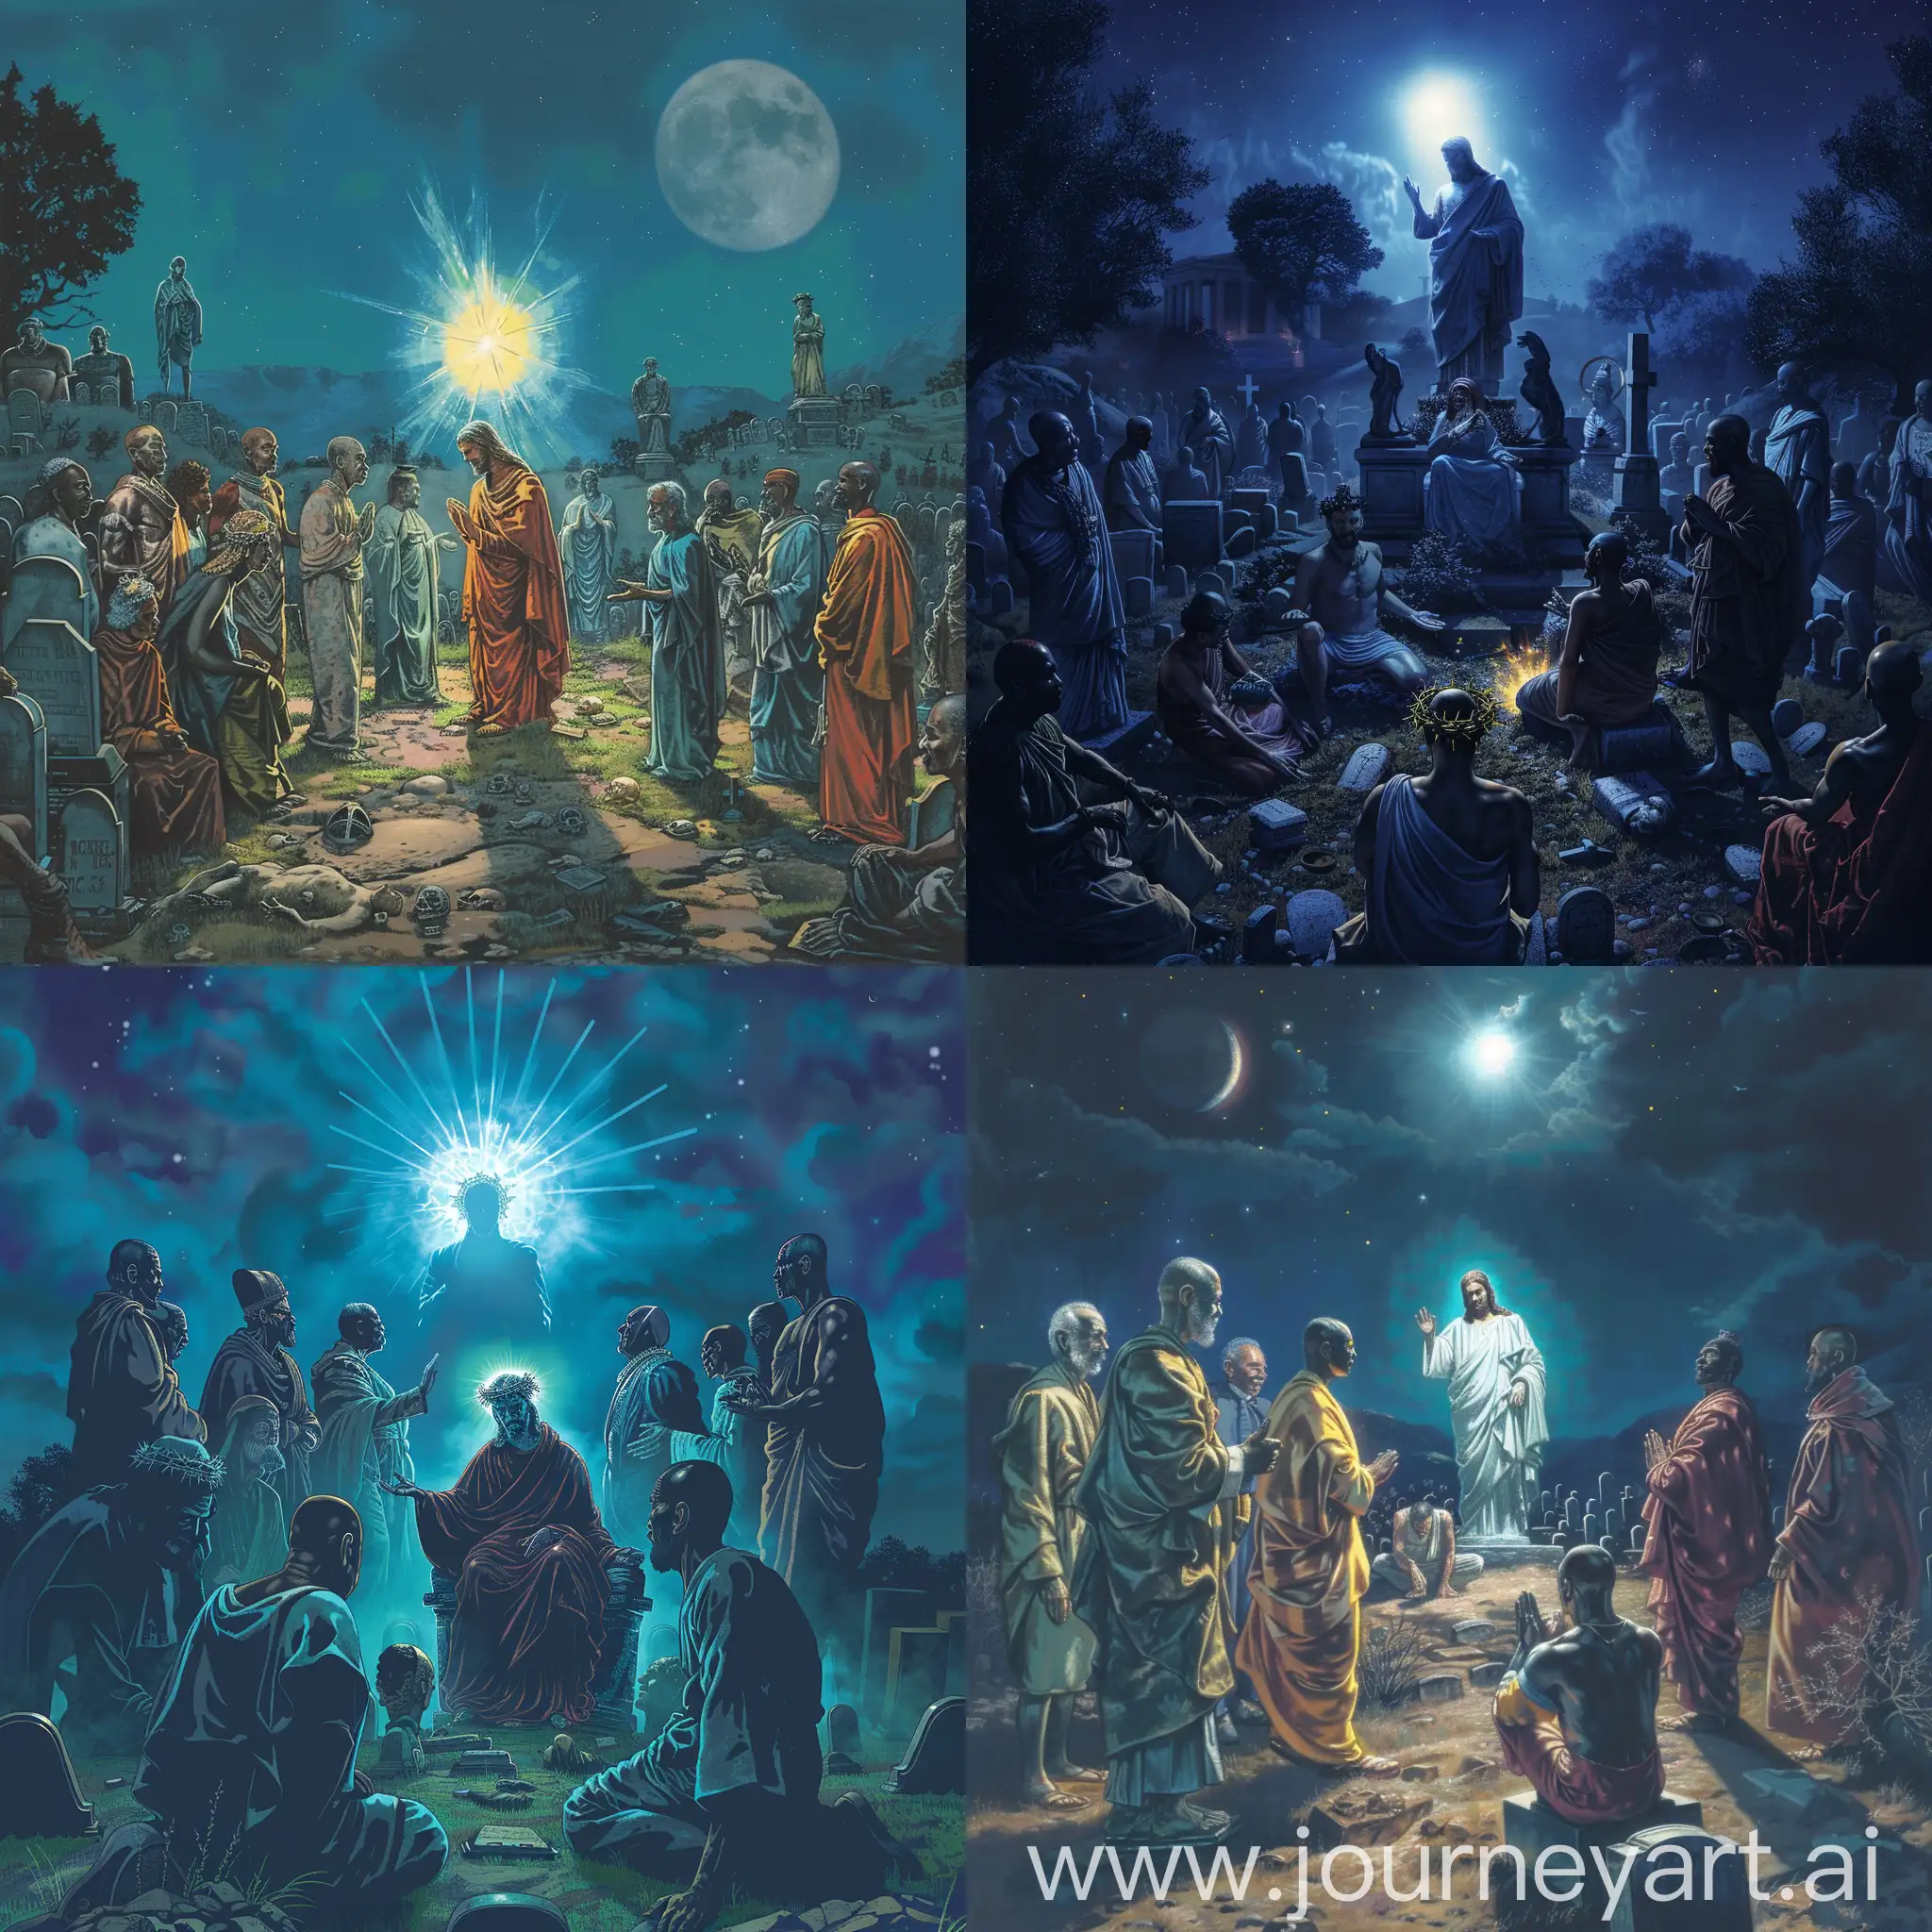 Historical-Figures-Paying-Homage-to-Glowing-Christ-in-Midnight-Graveyard-Scene